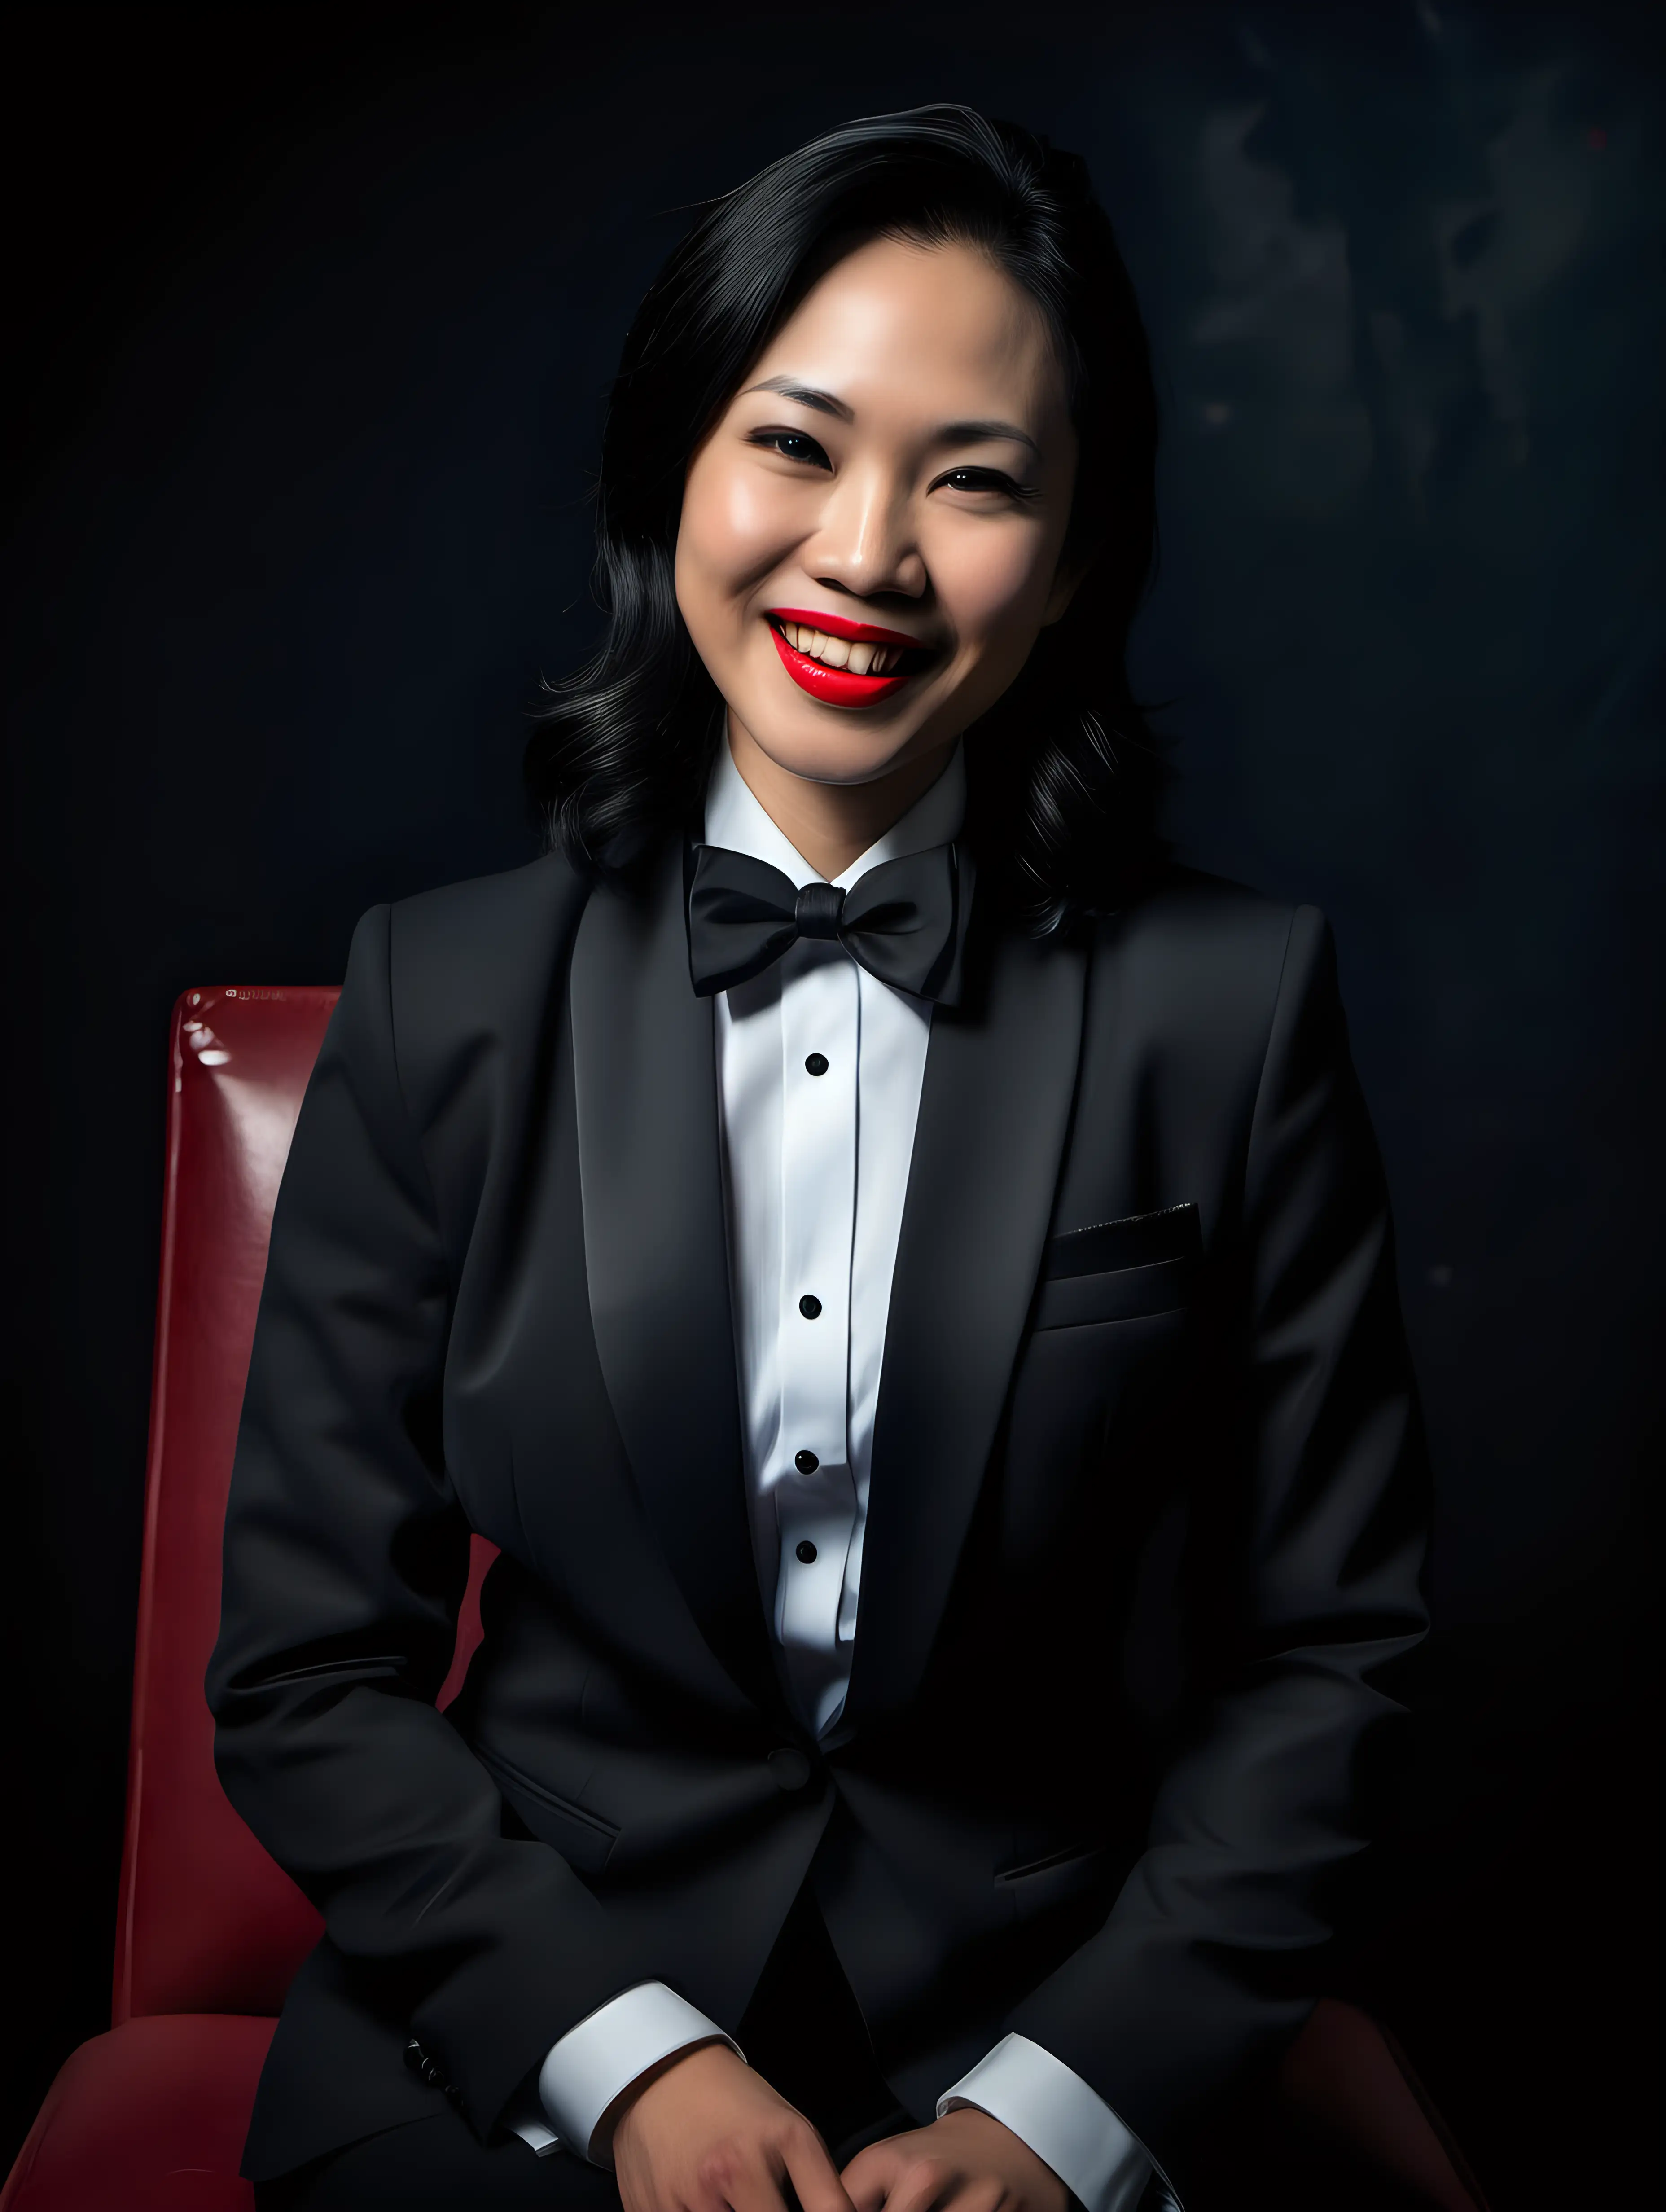 A portrait of a pretty 35 year old Vietnamese woman with shoulder length black hair and red lipstick is sitting in a chair in a dark room. She is facing forward. She is smiling and joyful and ecstatic. She is wearing a tuxedo. (Her jacket is open and not buttoned.) (Her pants are black.) Her shirt is white with a black bow tie. Her cufflinks are large and black. Her jacket is unbuttoned and has a corsage.